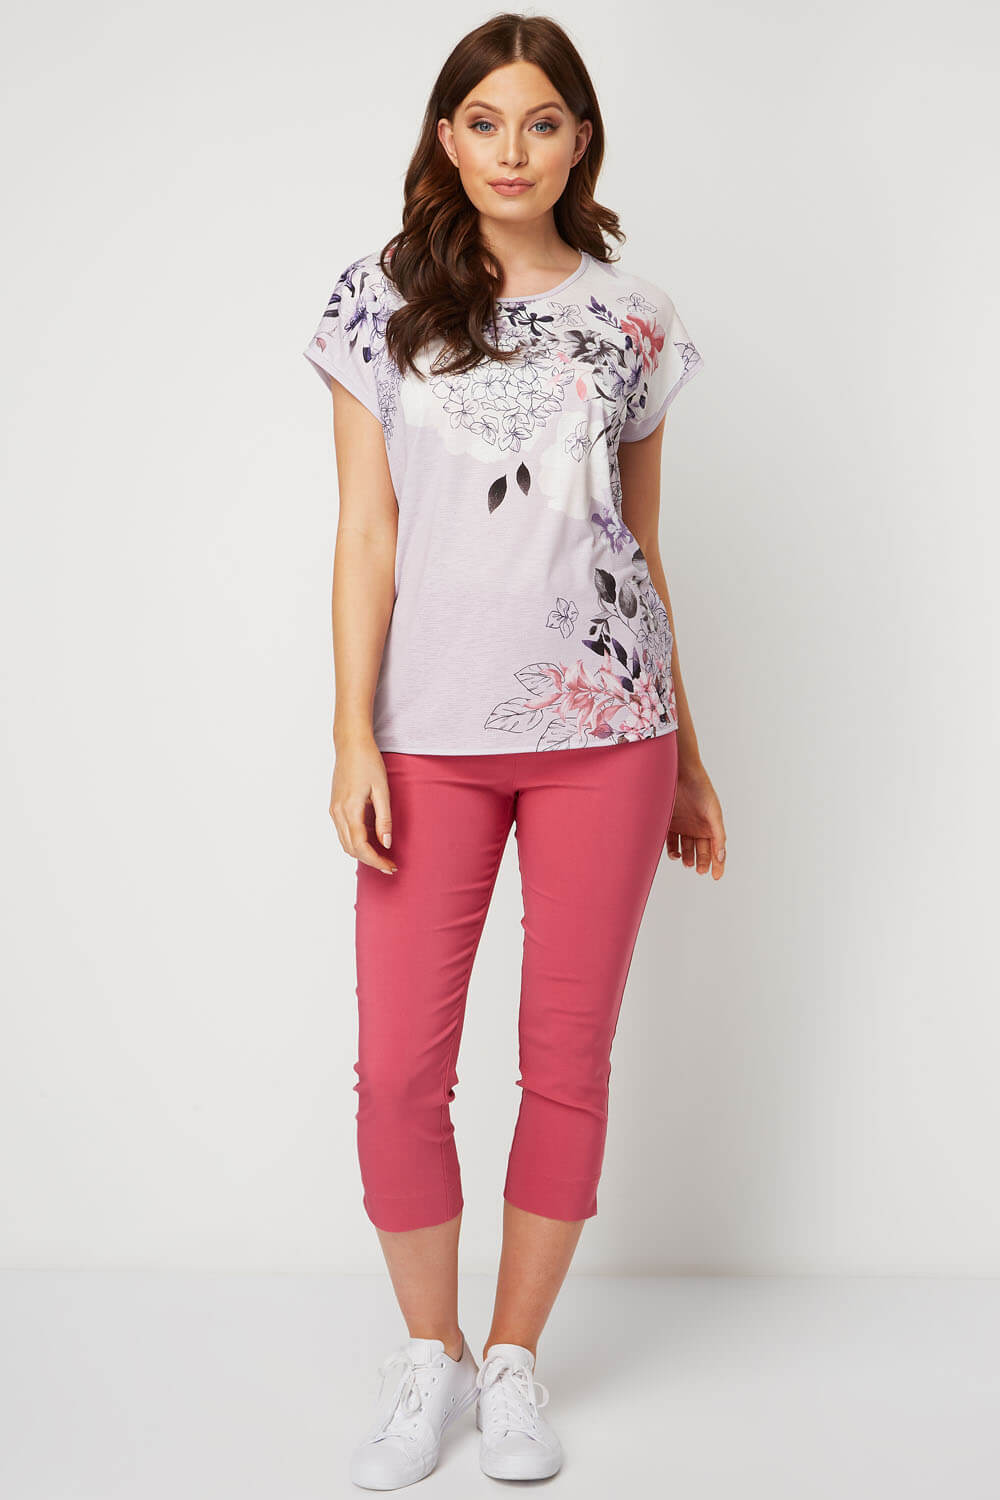 Lilac Floral Print T-Shirt Top, Image 2 of 8